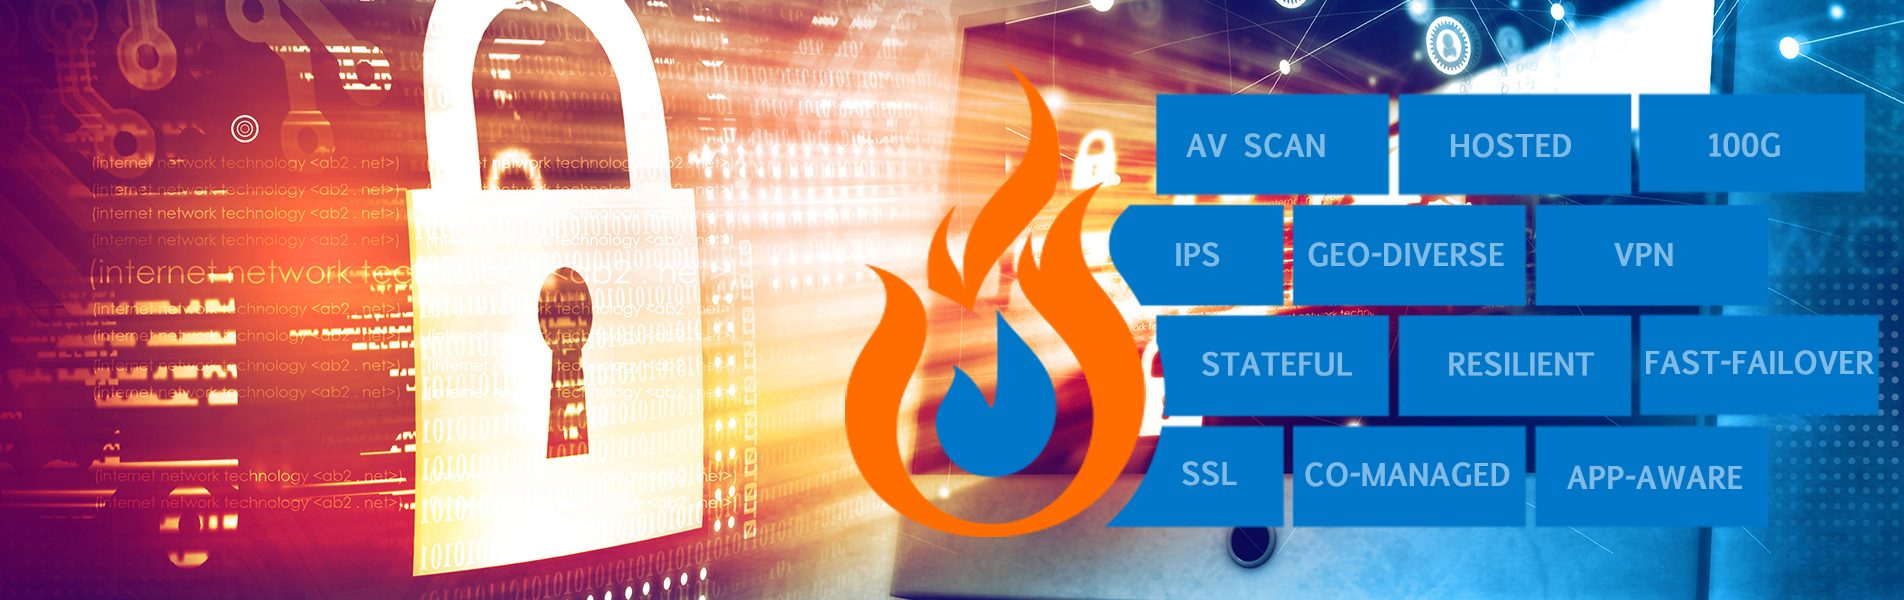 Graphic background with image of a lock, fire graphic with bricks that read: AV Scan, Hosted, 100G, IPS, Geo-diverse, VPN, Stateful, Resilient, Fast-Failover, SSL, Co-managed, App-aware